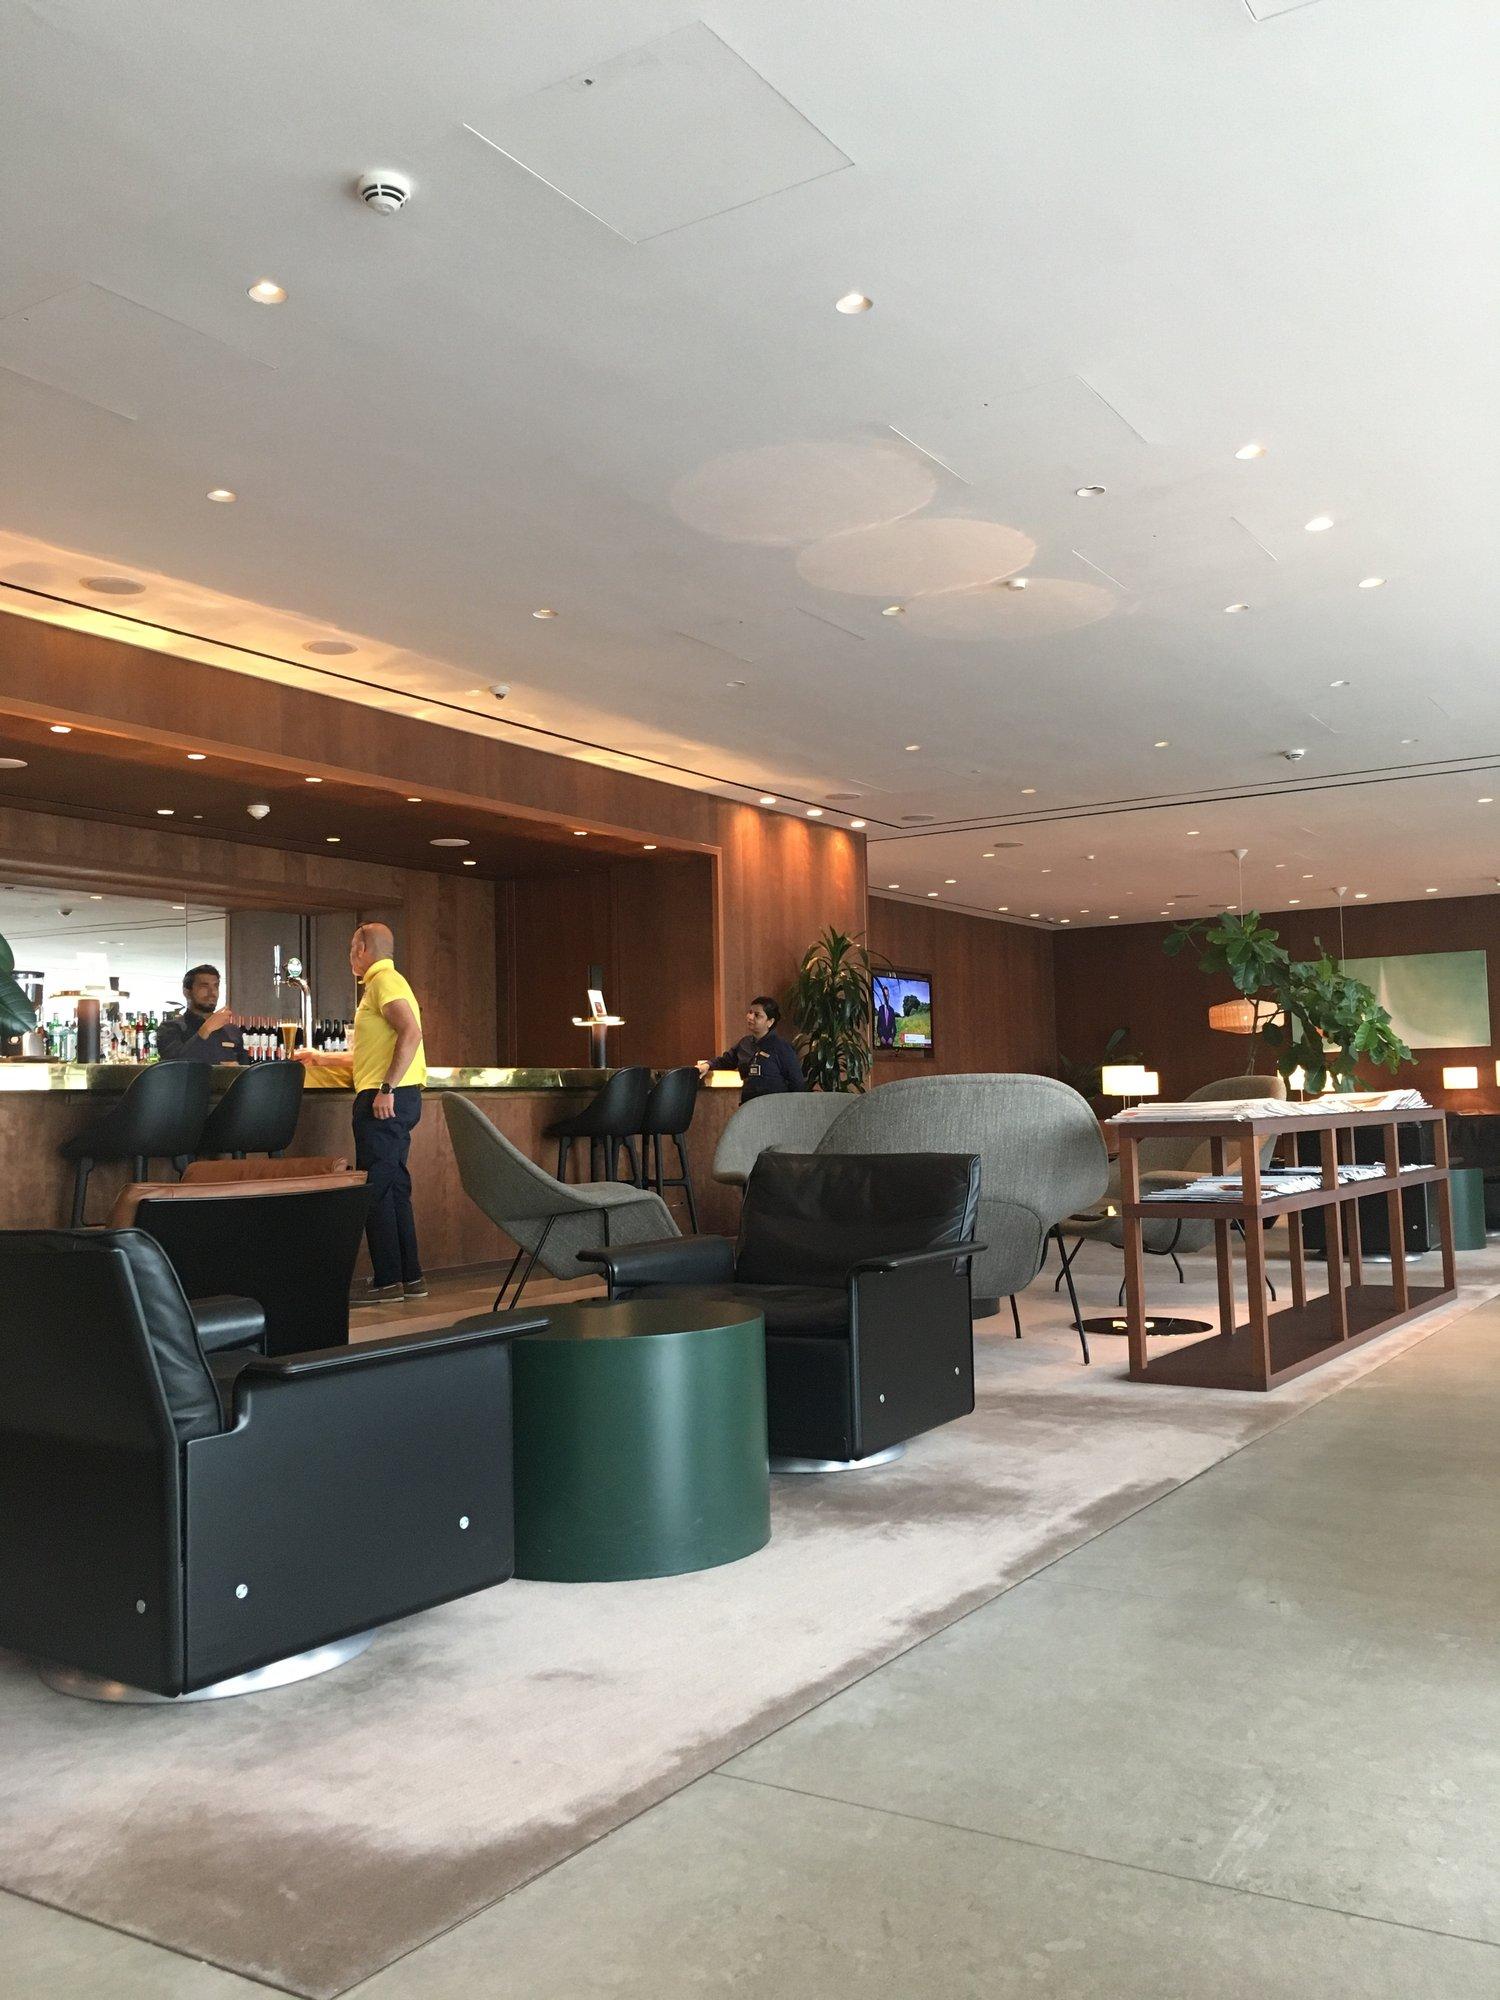 Cathay Pacific Business Class Lounge image 12 of 48